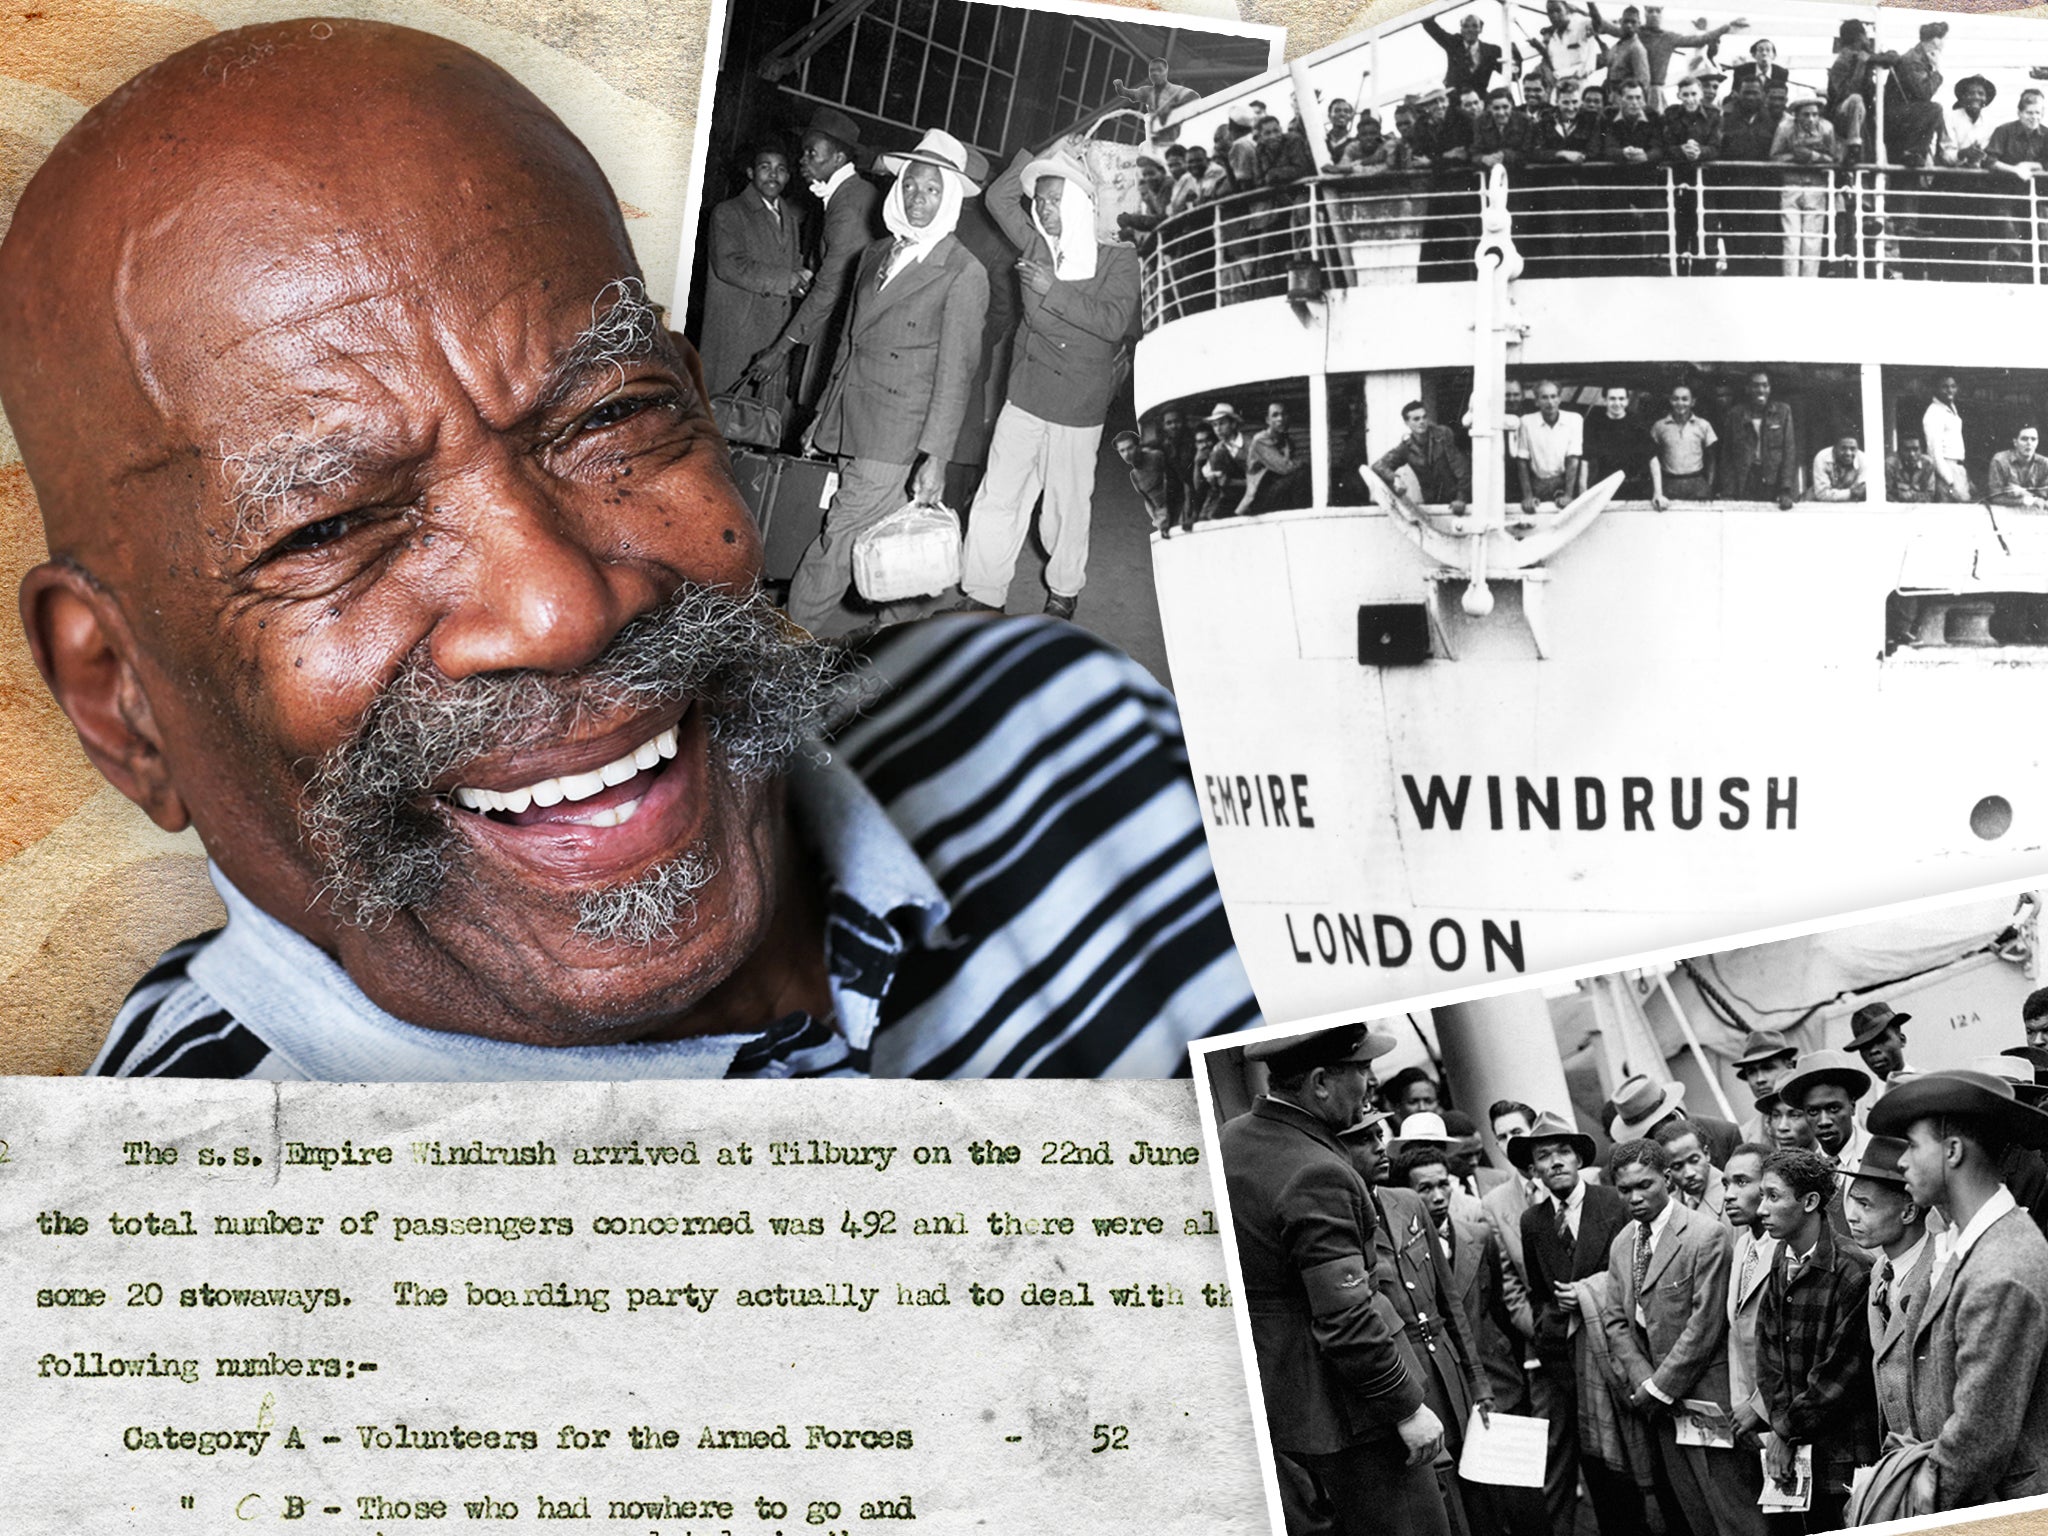 Alford Gardner, who arrived in Britain in 1948 on the first Windrush ship to dock in Tilbury, Essex, speaking at his home in Leeds